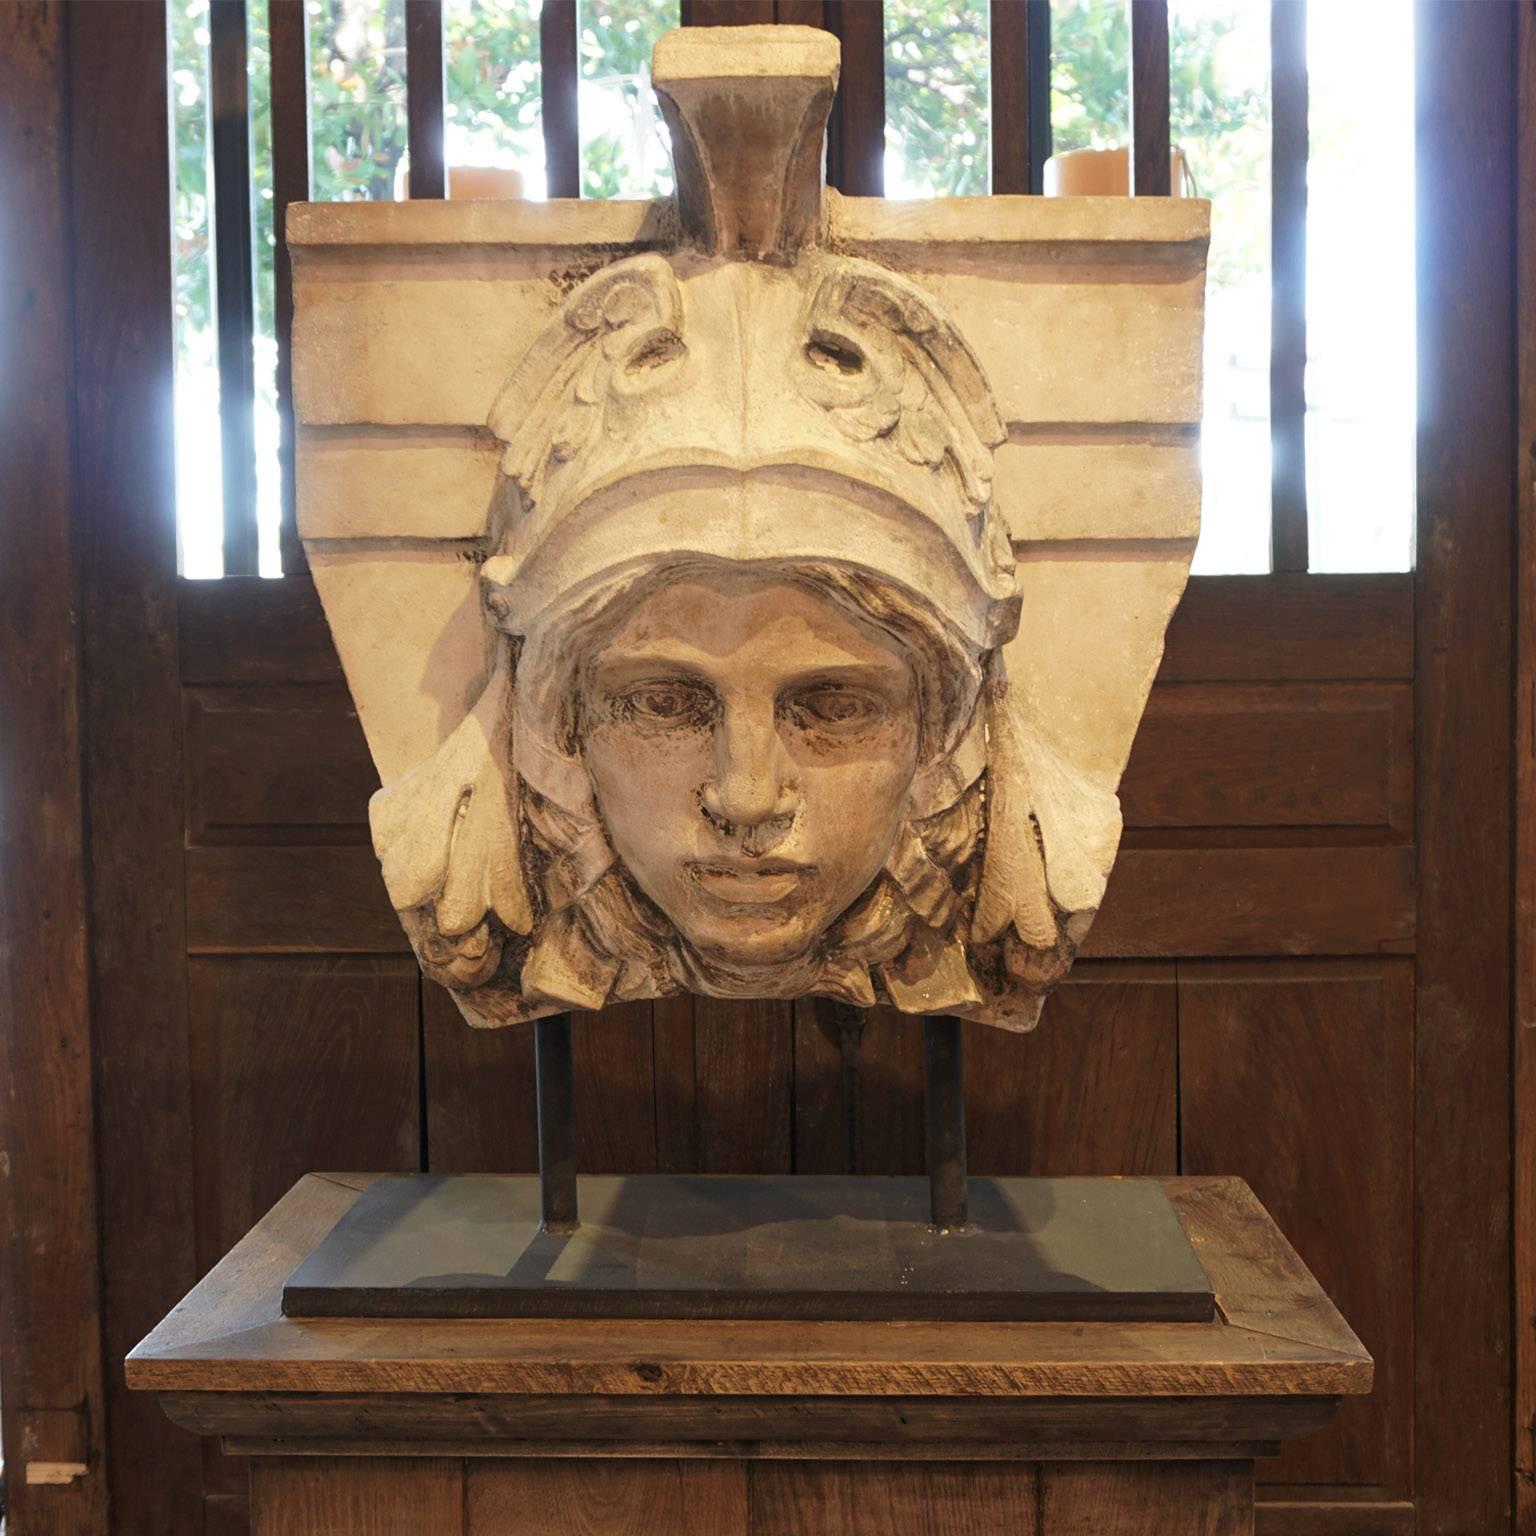 Circa 1790, A keystone of a building depicting the warrior mercury, mounted on a rectangular metal base, with an antique oak pedestal.
Prov. London England, hand-carved in Portland stone.
   